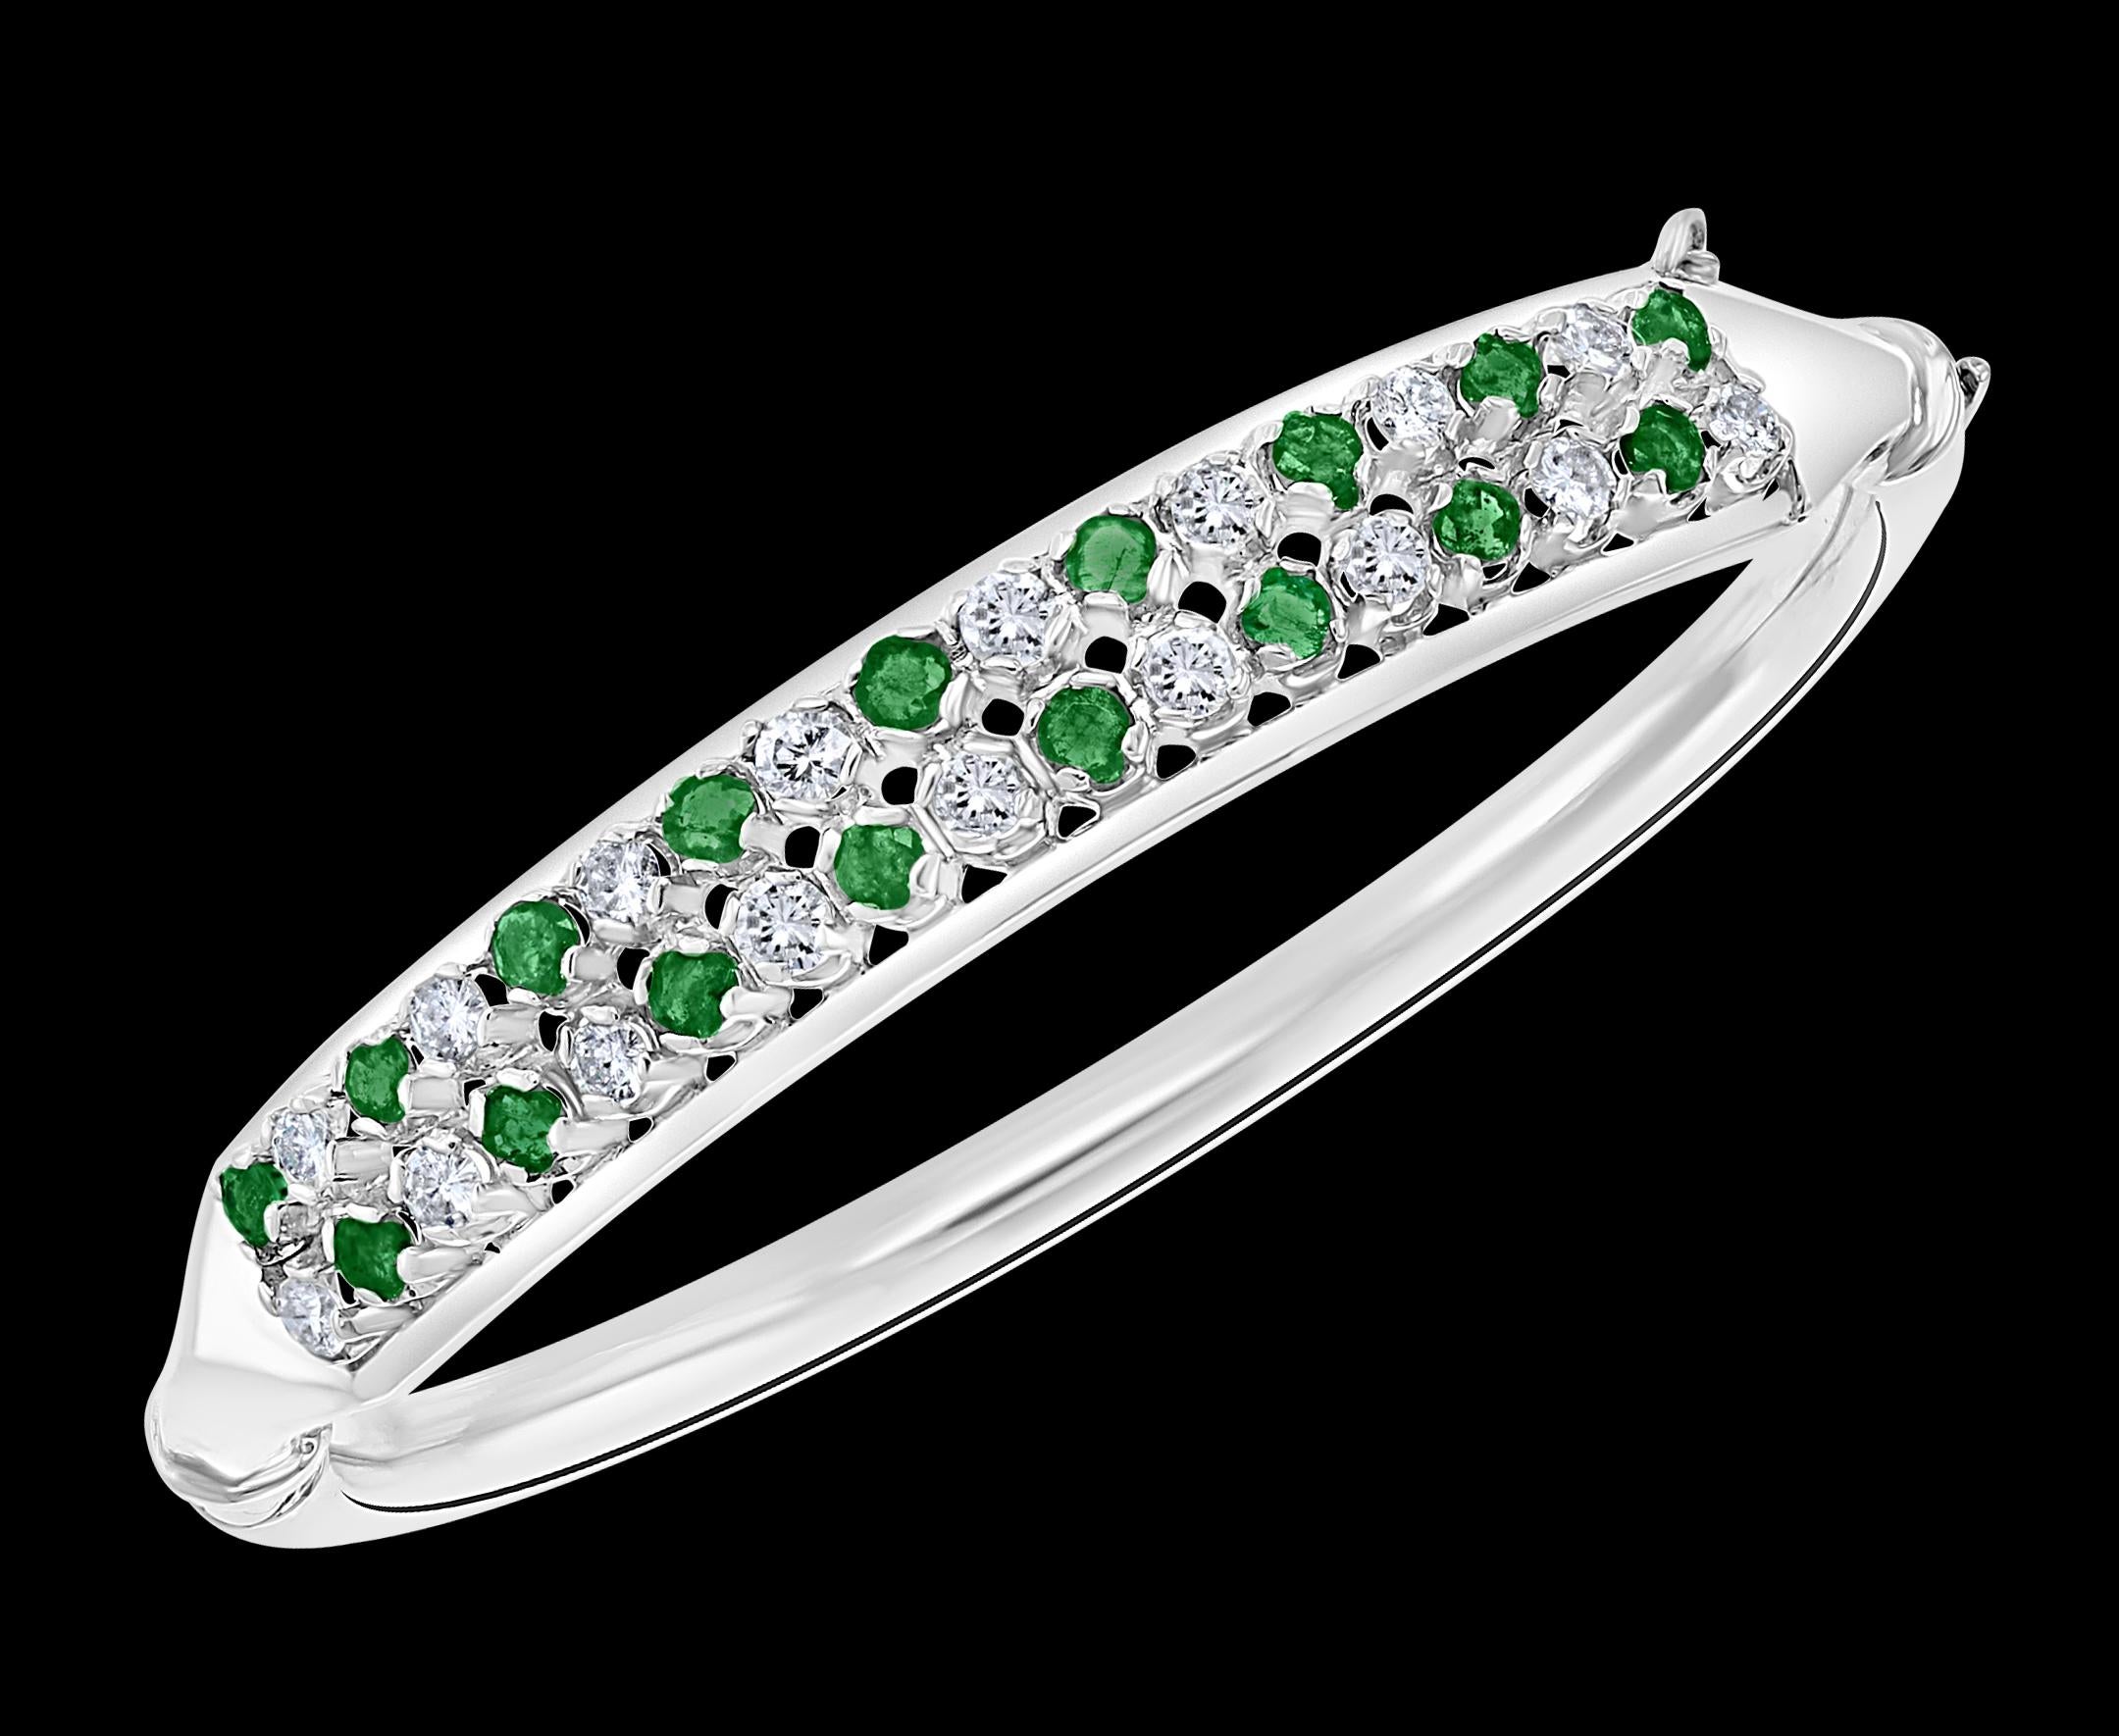  Emeralds And  Diamonds 14 Karat  White Gold 20 Grams Bangle /Bracelet
It features a bangle crafted with  14 karat heavy White gold .
 Two rows of Round brilliant diamonds of the top quality alternating with Round Emeralds
Opens from side for east